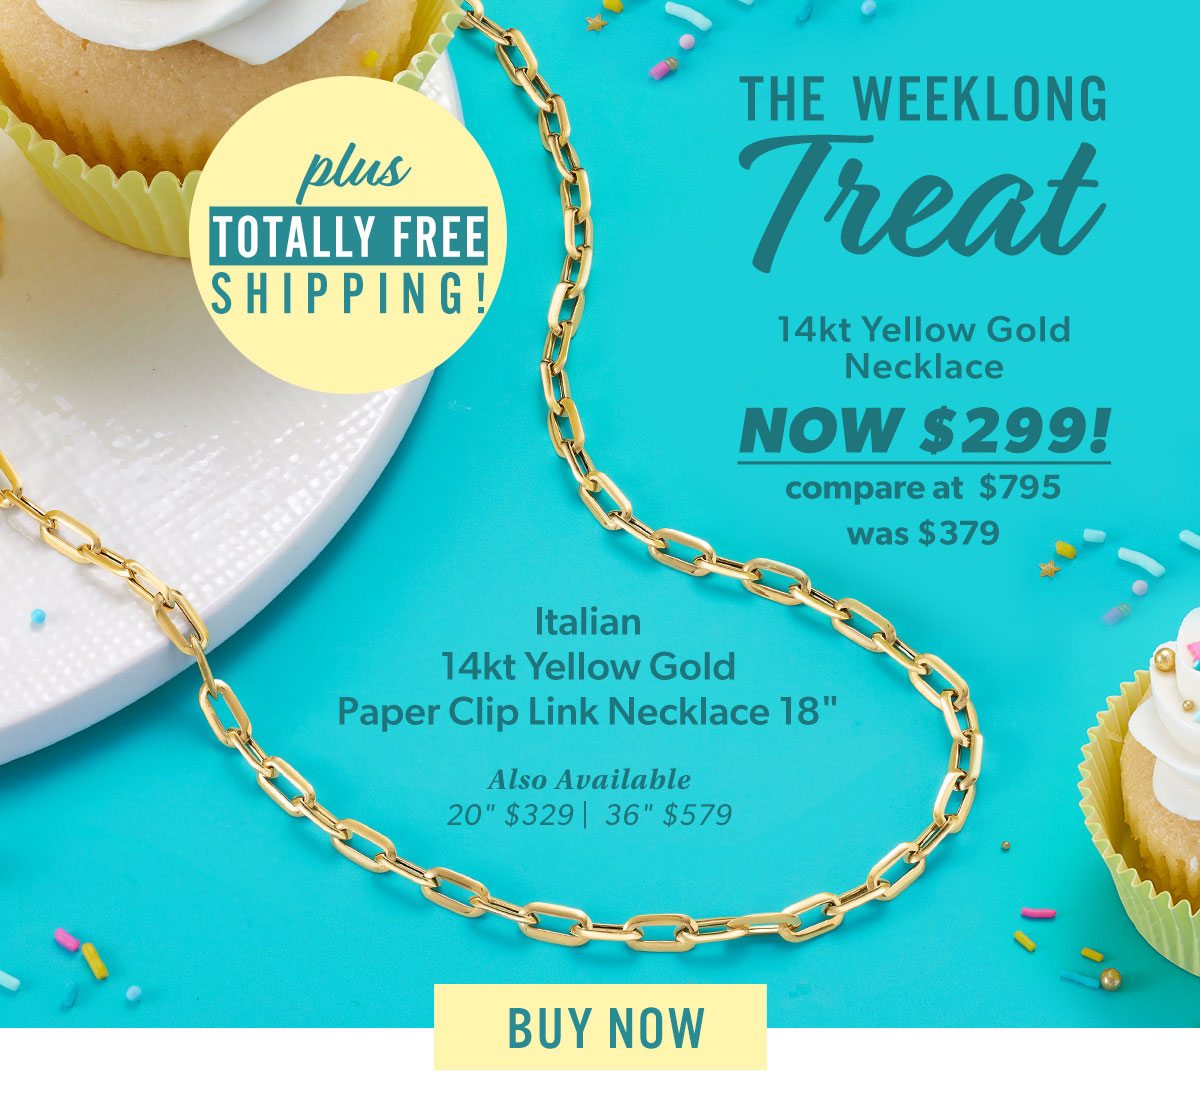 The Weeklong treat. 14kt Gold Necklace. Now $299! Buy Now